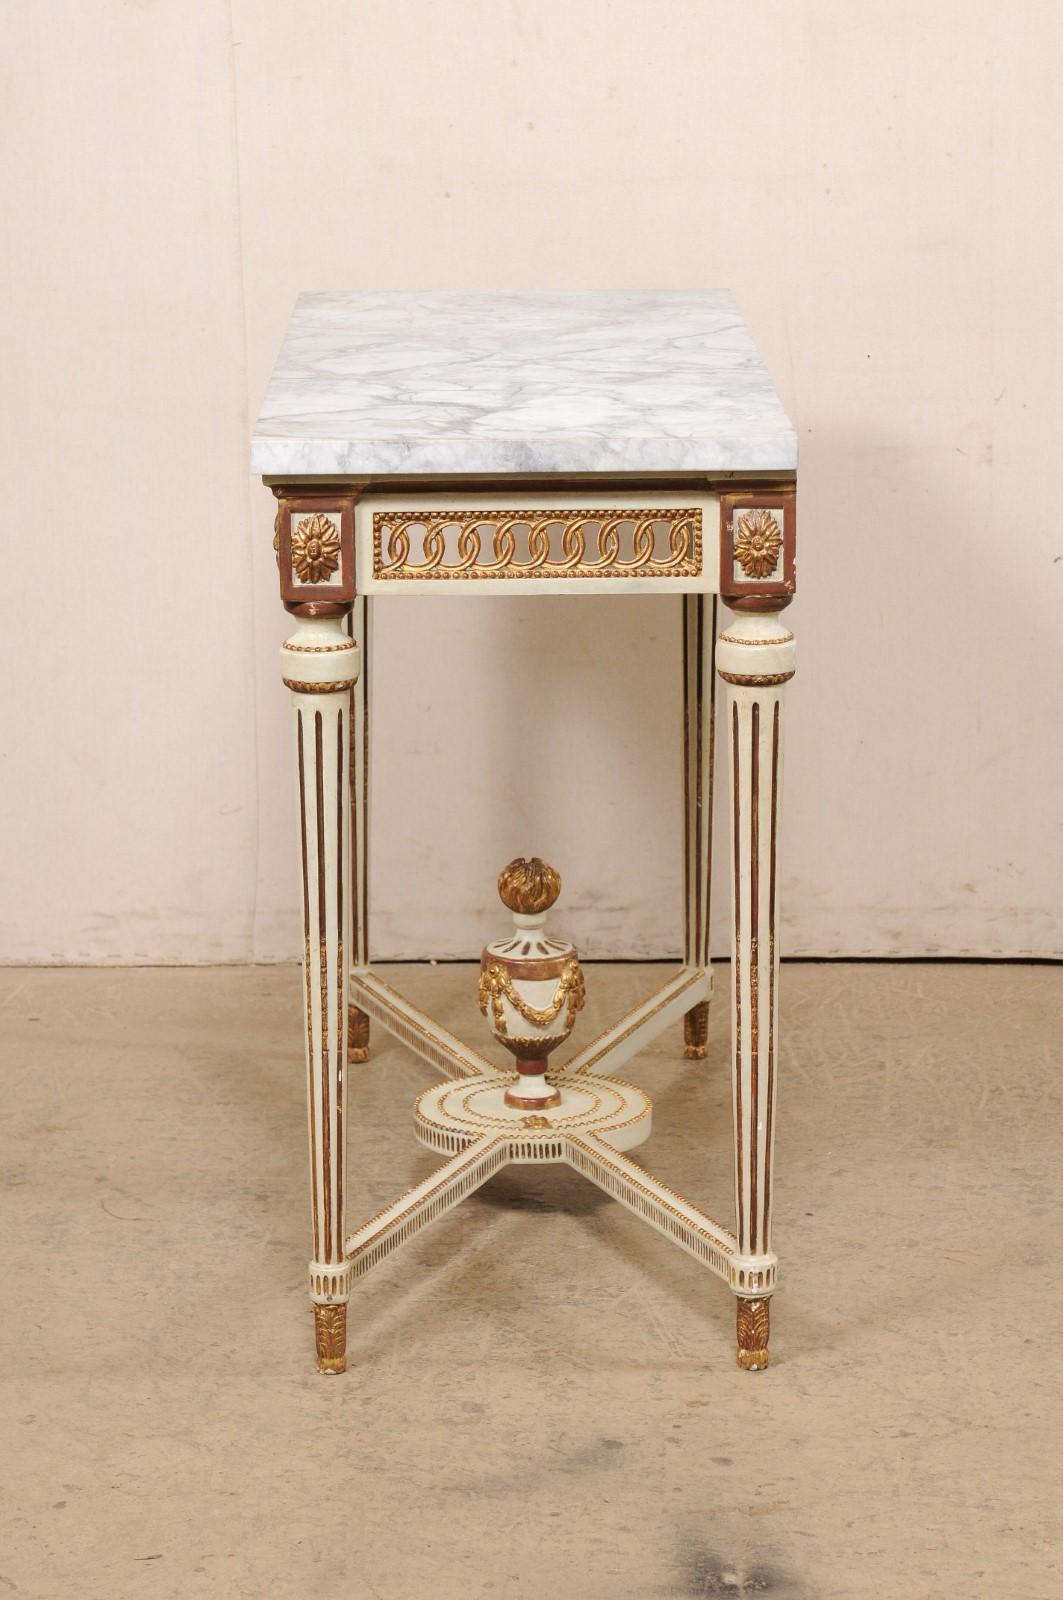 Italian Marble Top Console w/Pierce-Carved Apron & Large Urn Finial at Underside For Sale 5